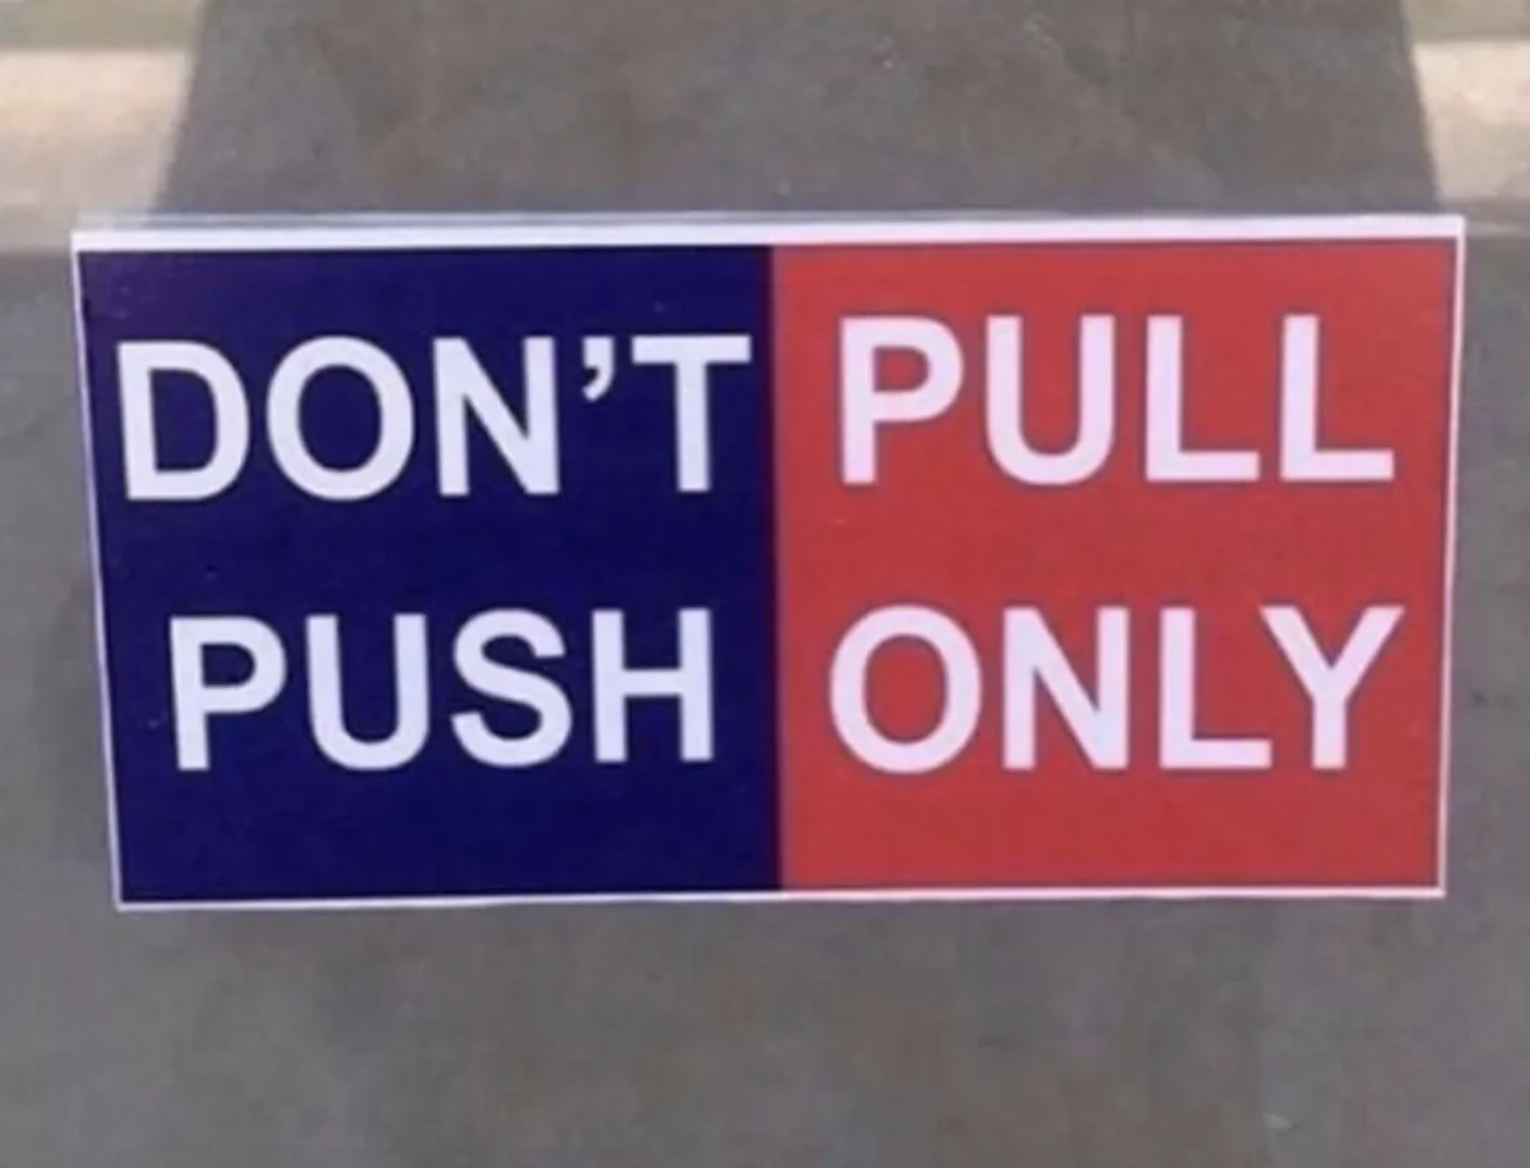 Sign reads &quot;DON&#x27;T PULL PUSH ONLY&quot; indicating the door should only be pushed to open